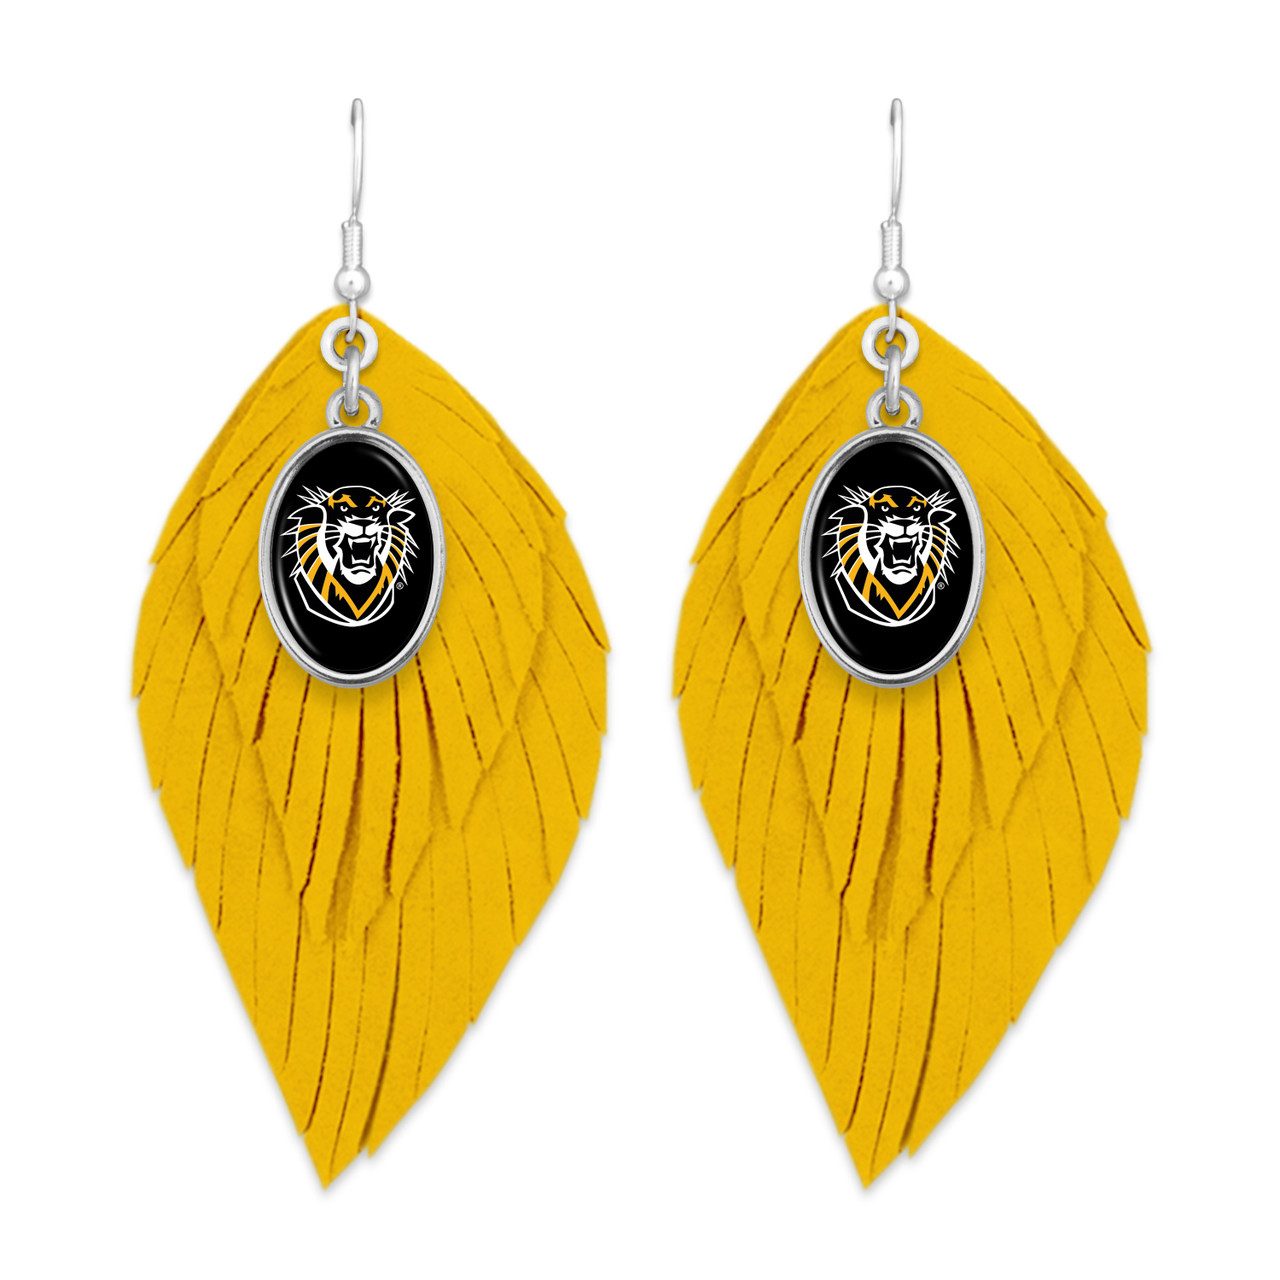 Fort Hays State Tigers Earrings- Boho Primary Color